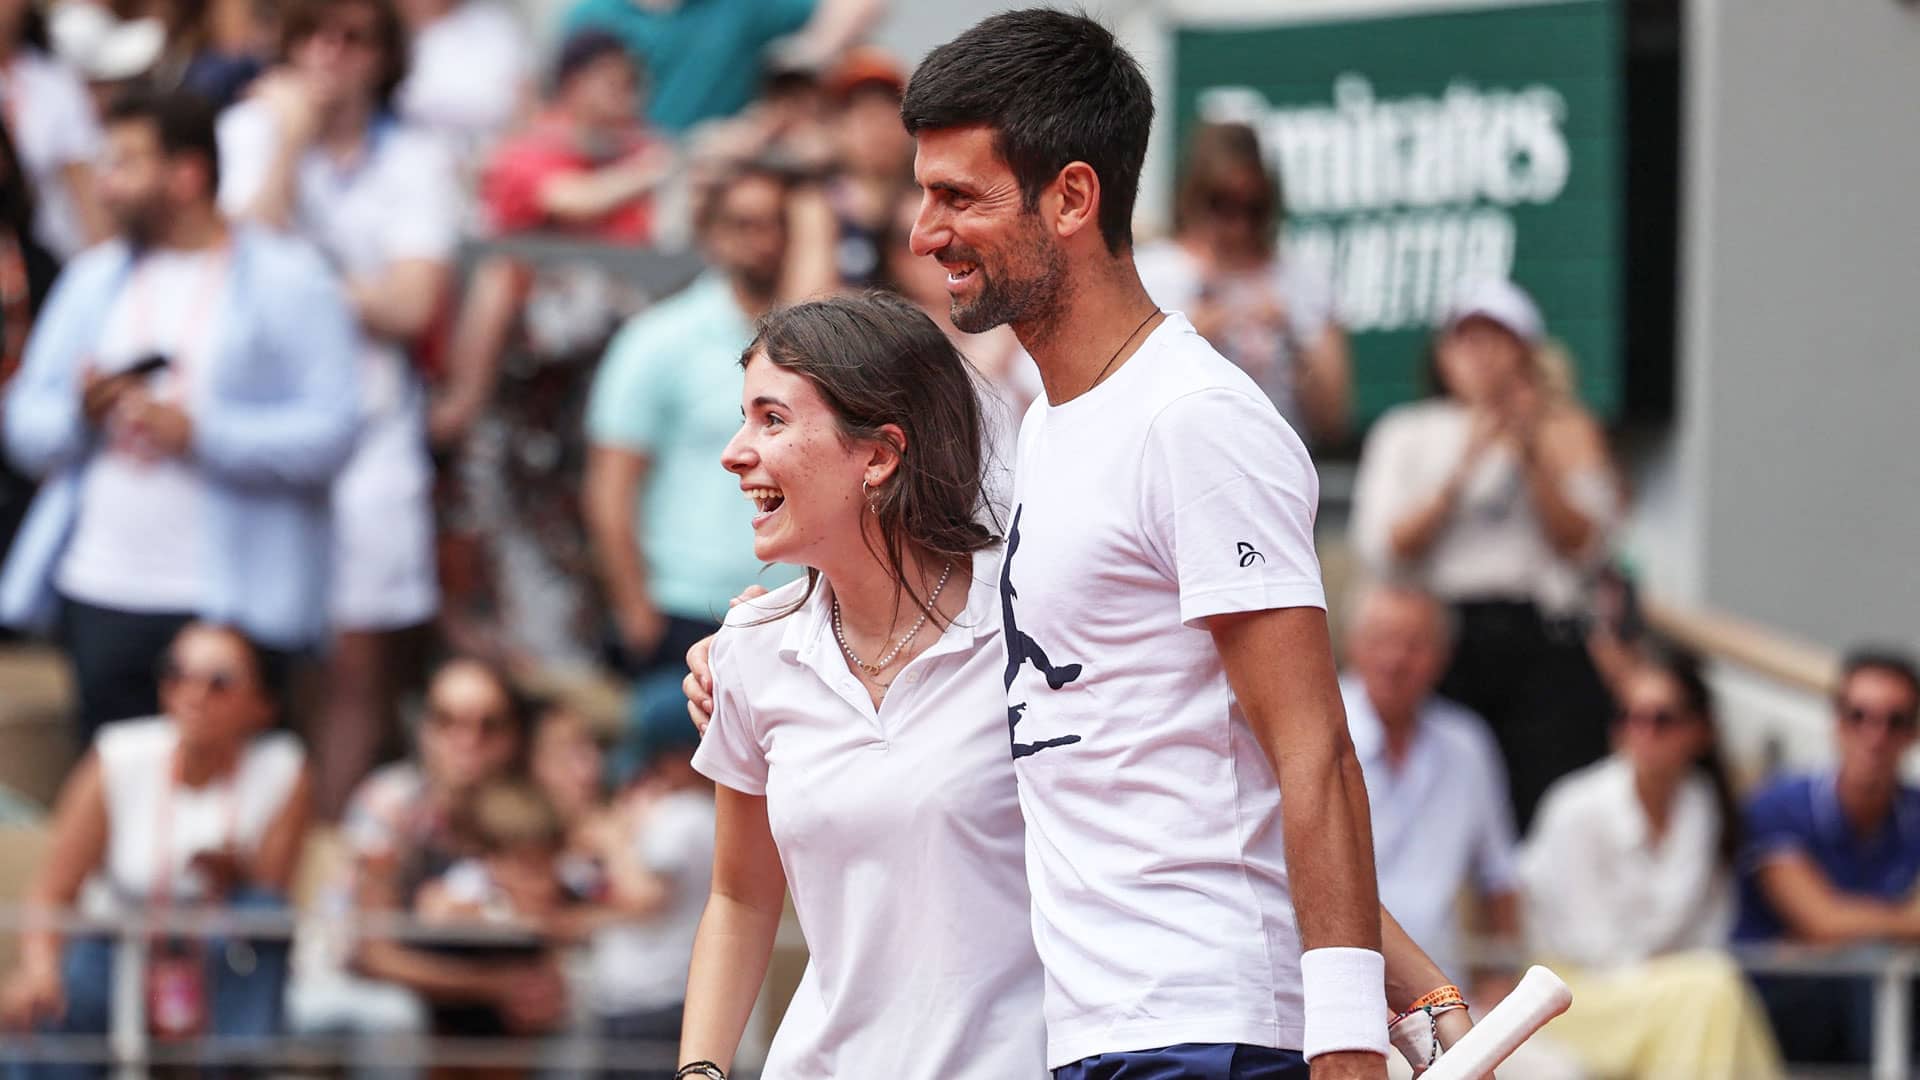 Novak Djokovic continues to make fan interaction a high priority at Roland Garros.